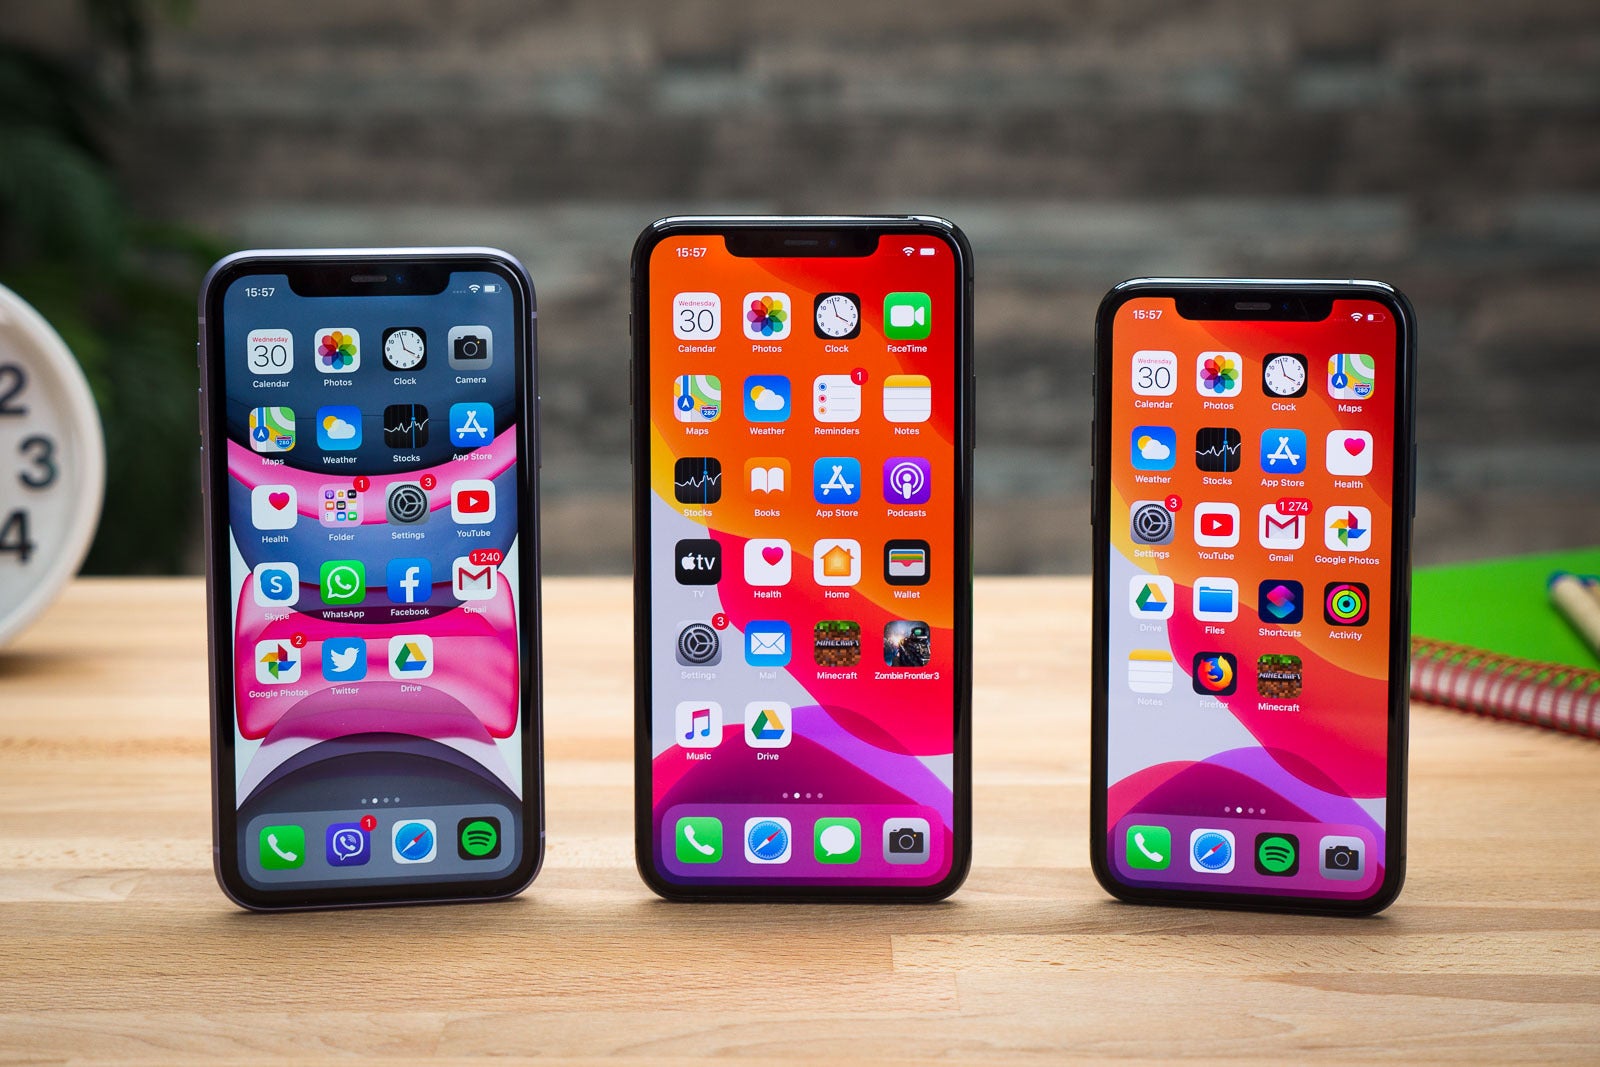 The iPhone 11 series - Apple to stockpile 5G iPhone 12 series due to potential component shortages